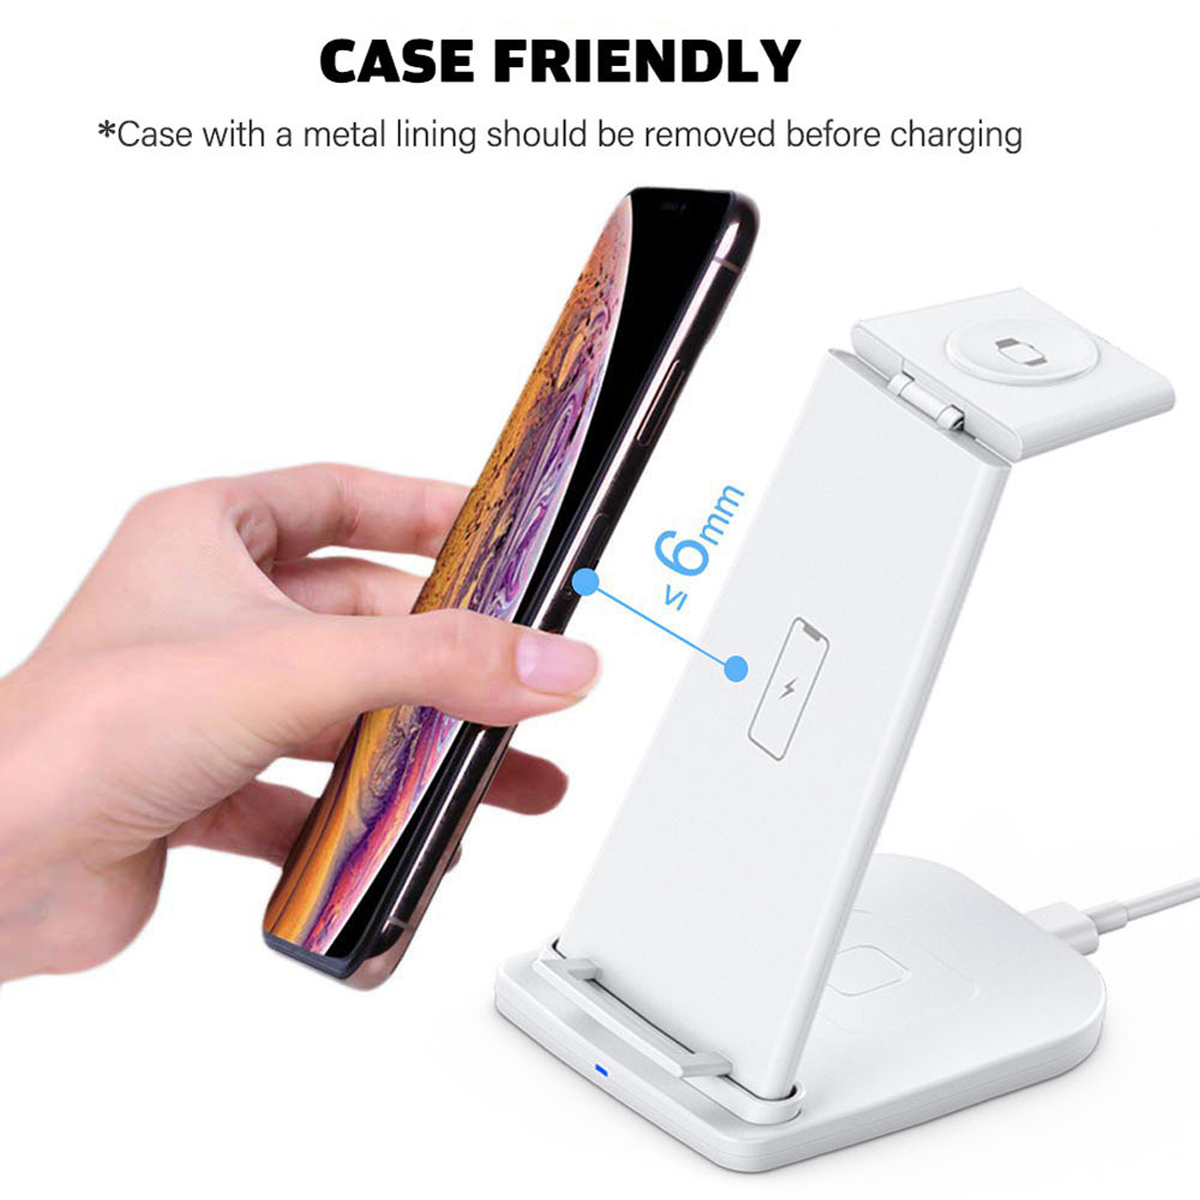 3-in1-Qi-Wireless-Fast-Charger-Dock-Charging-Stand-For-Apple-Watch-For-iPhone-Phone-Airpods-Pro-1737622-3